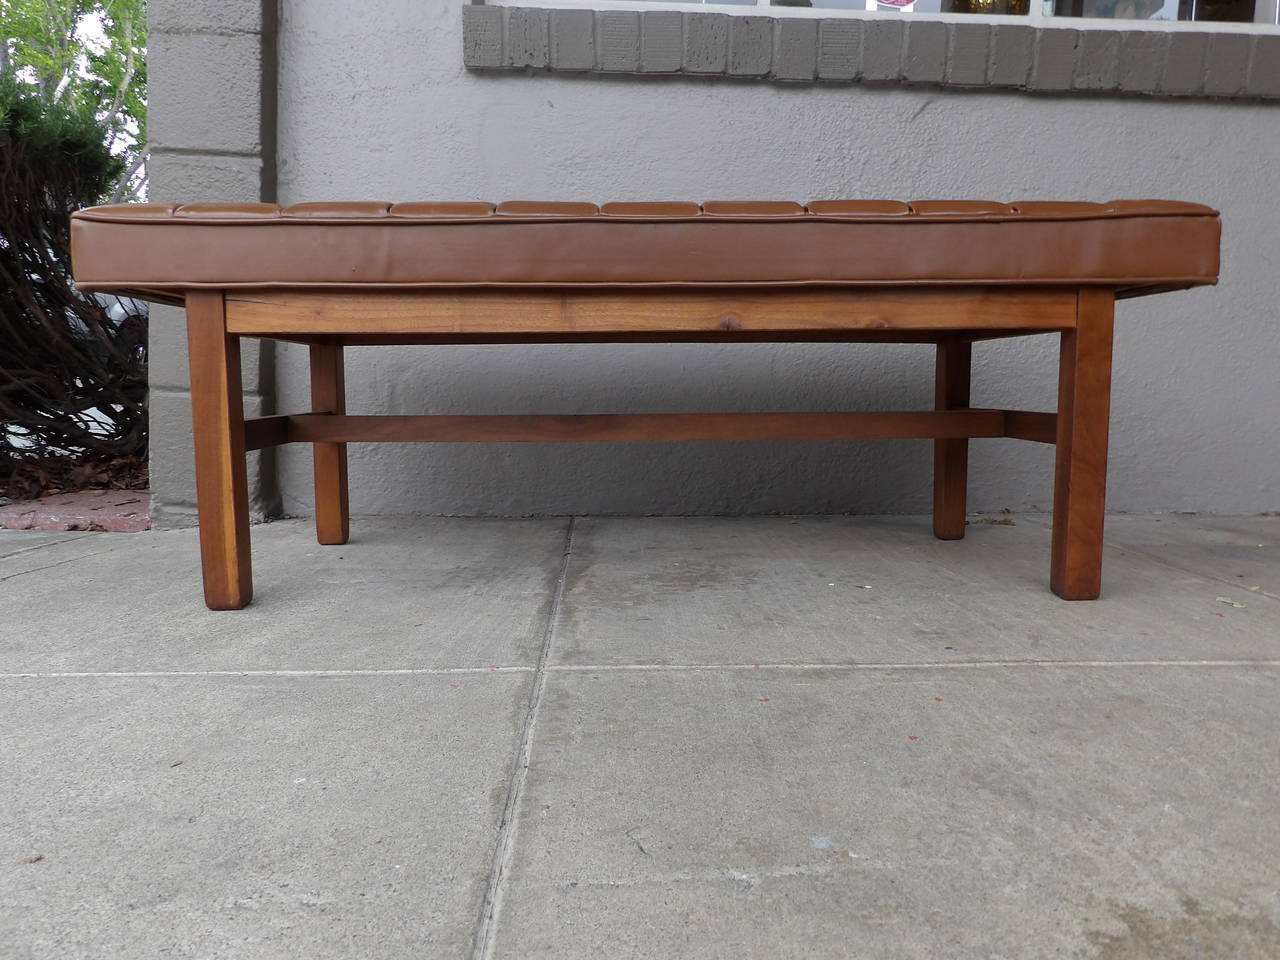 A Classic 1960s American modern button tufted bench in vinyl with a solid walnut frame.